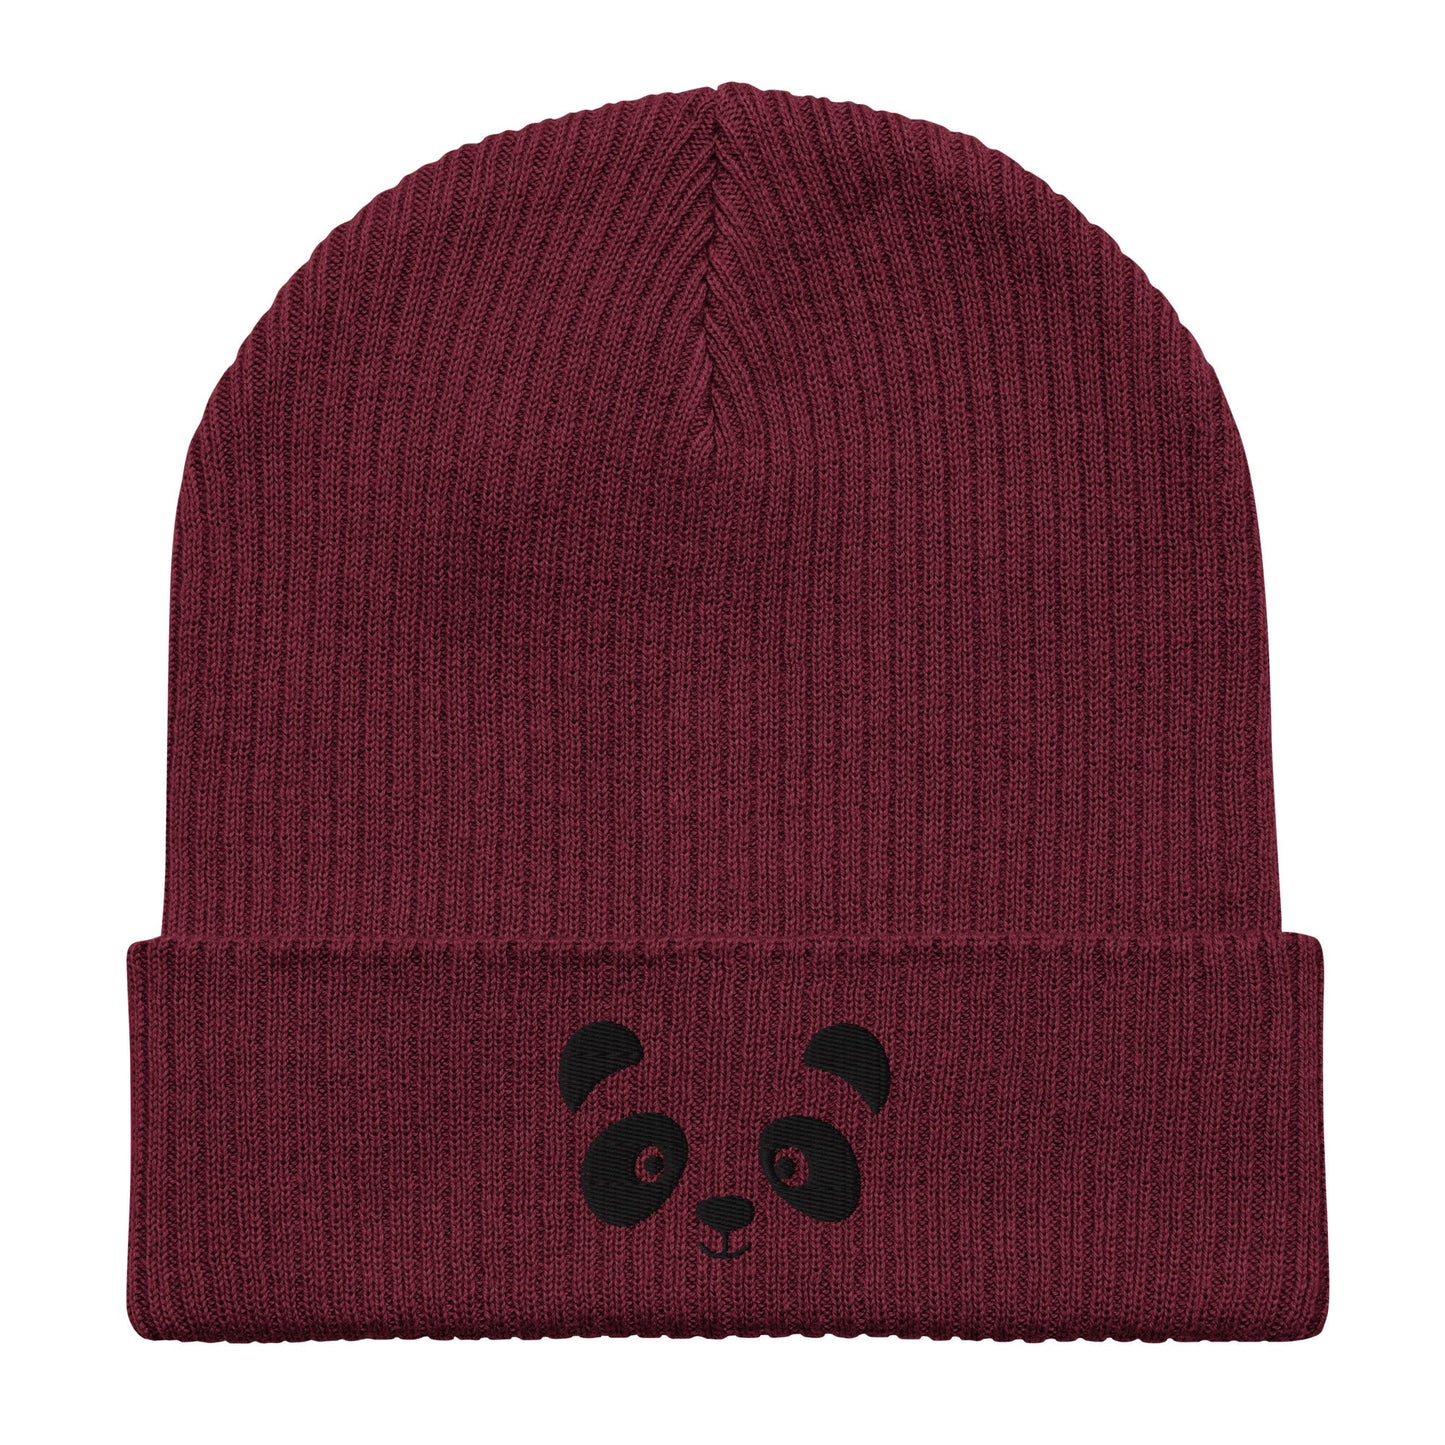 Panda face black embroidered, organic cotton ribbed beanie-36